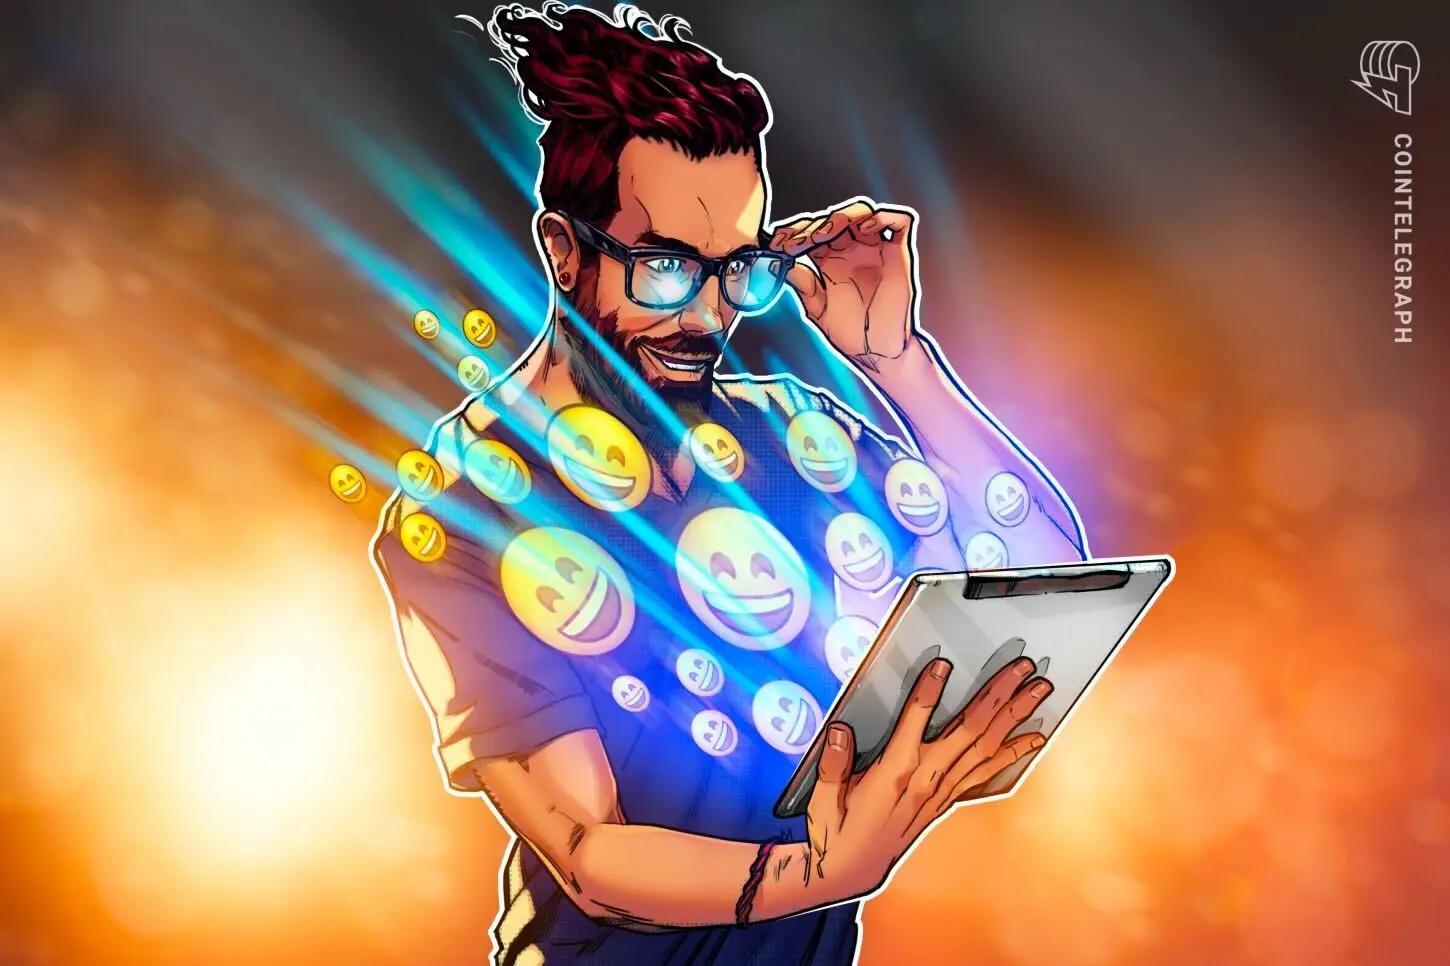 Predicting Crypto Trading Outcomes Using Emoji Sentiment: Research Findings